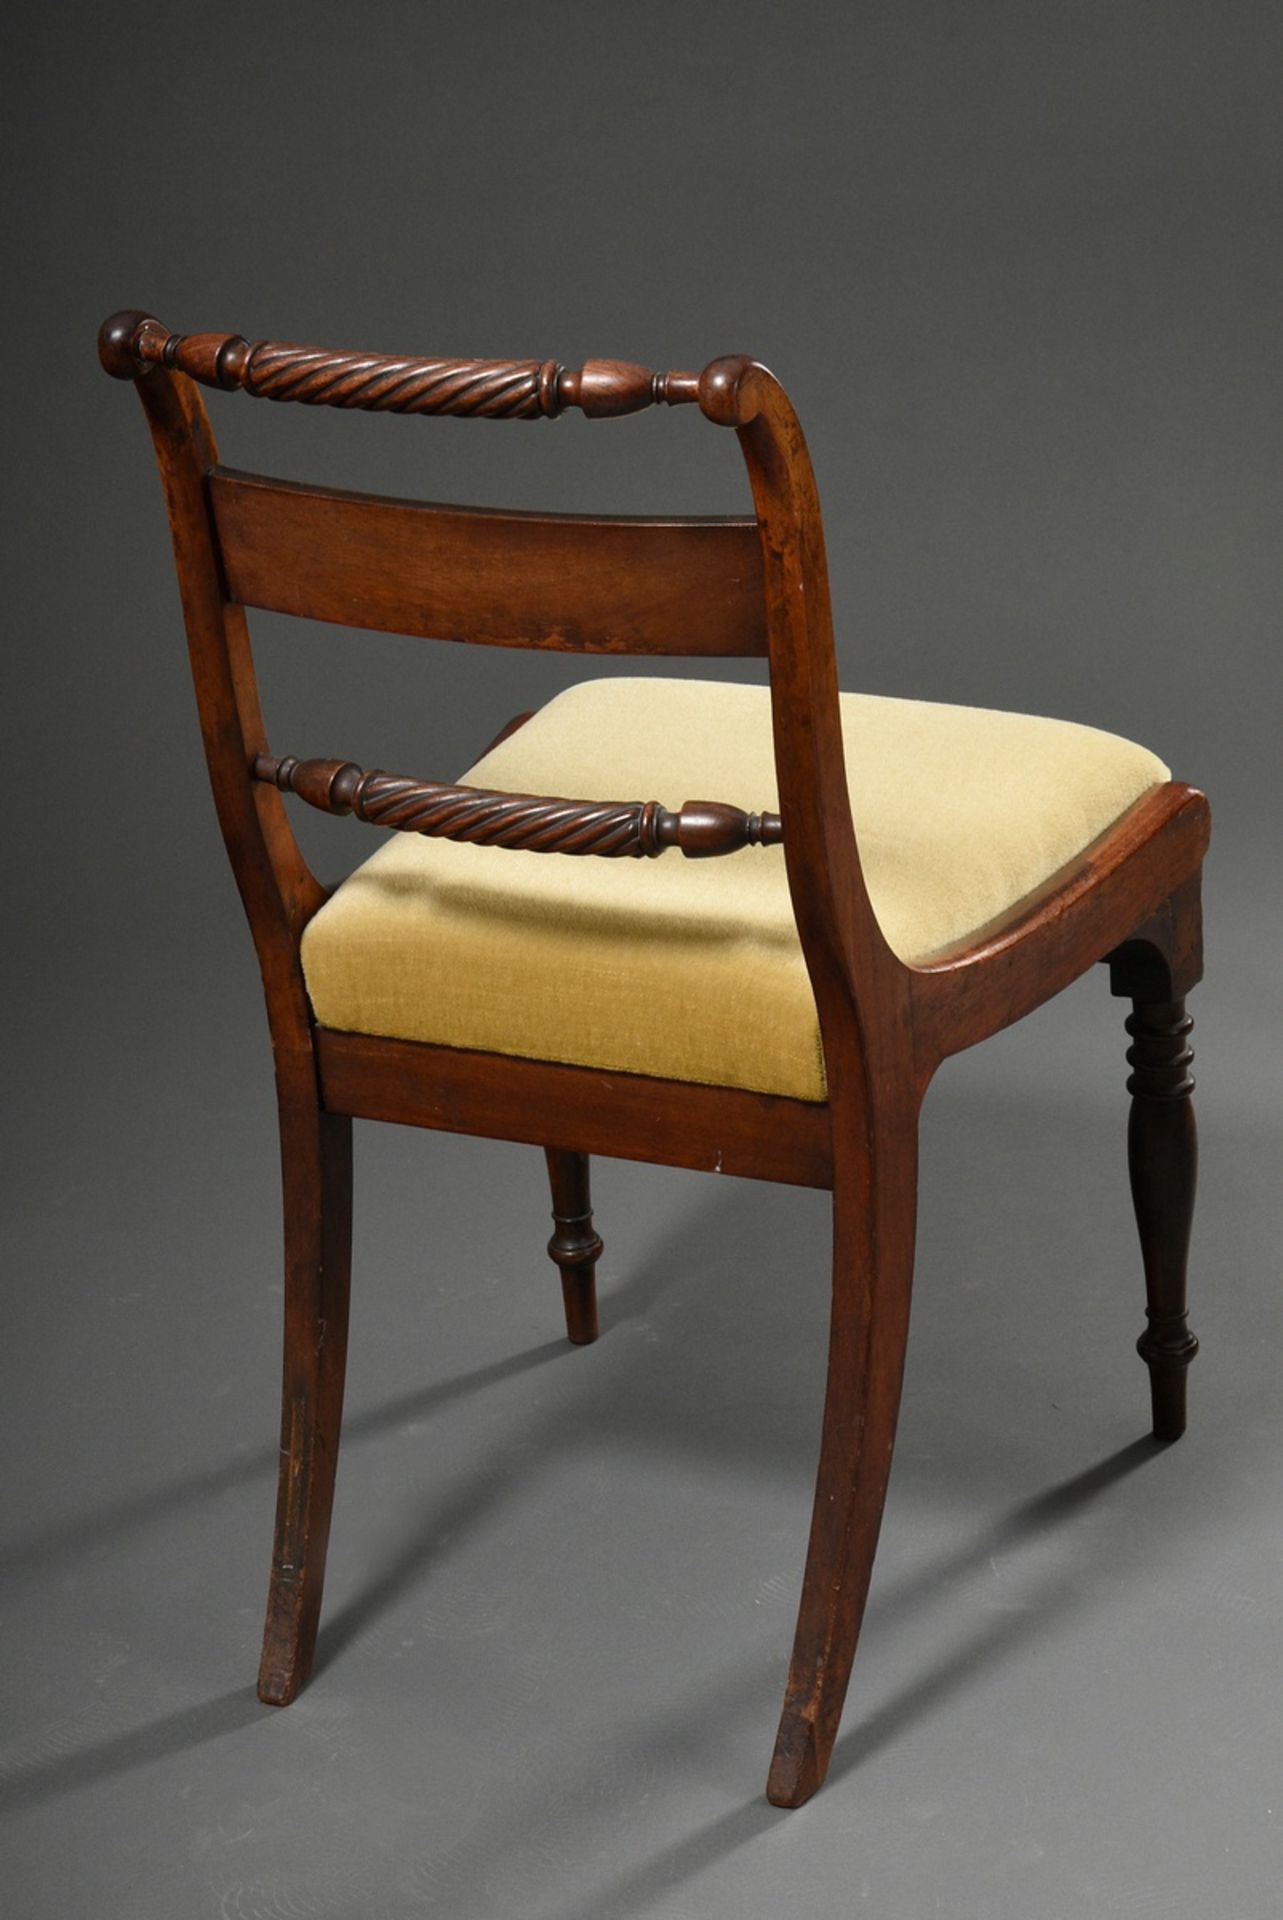 Biedermeier chair with turned rollers in the backrest, mahogany, light upholstery, h. 46/84cm - Image 2 of 4